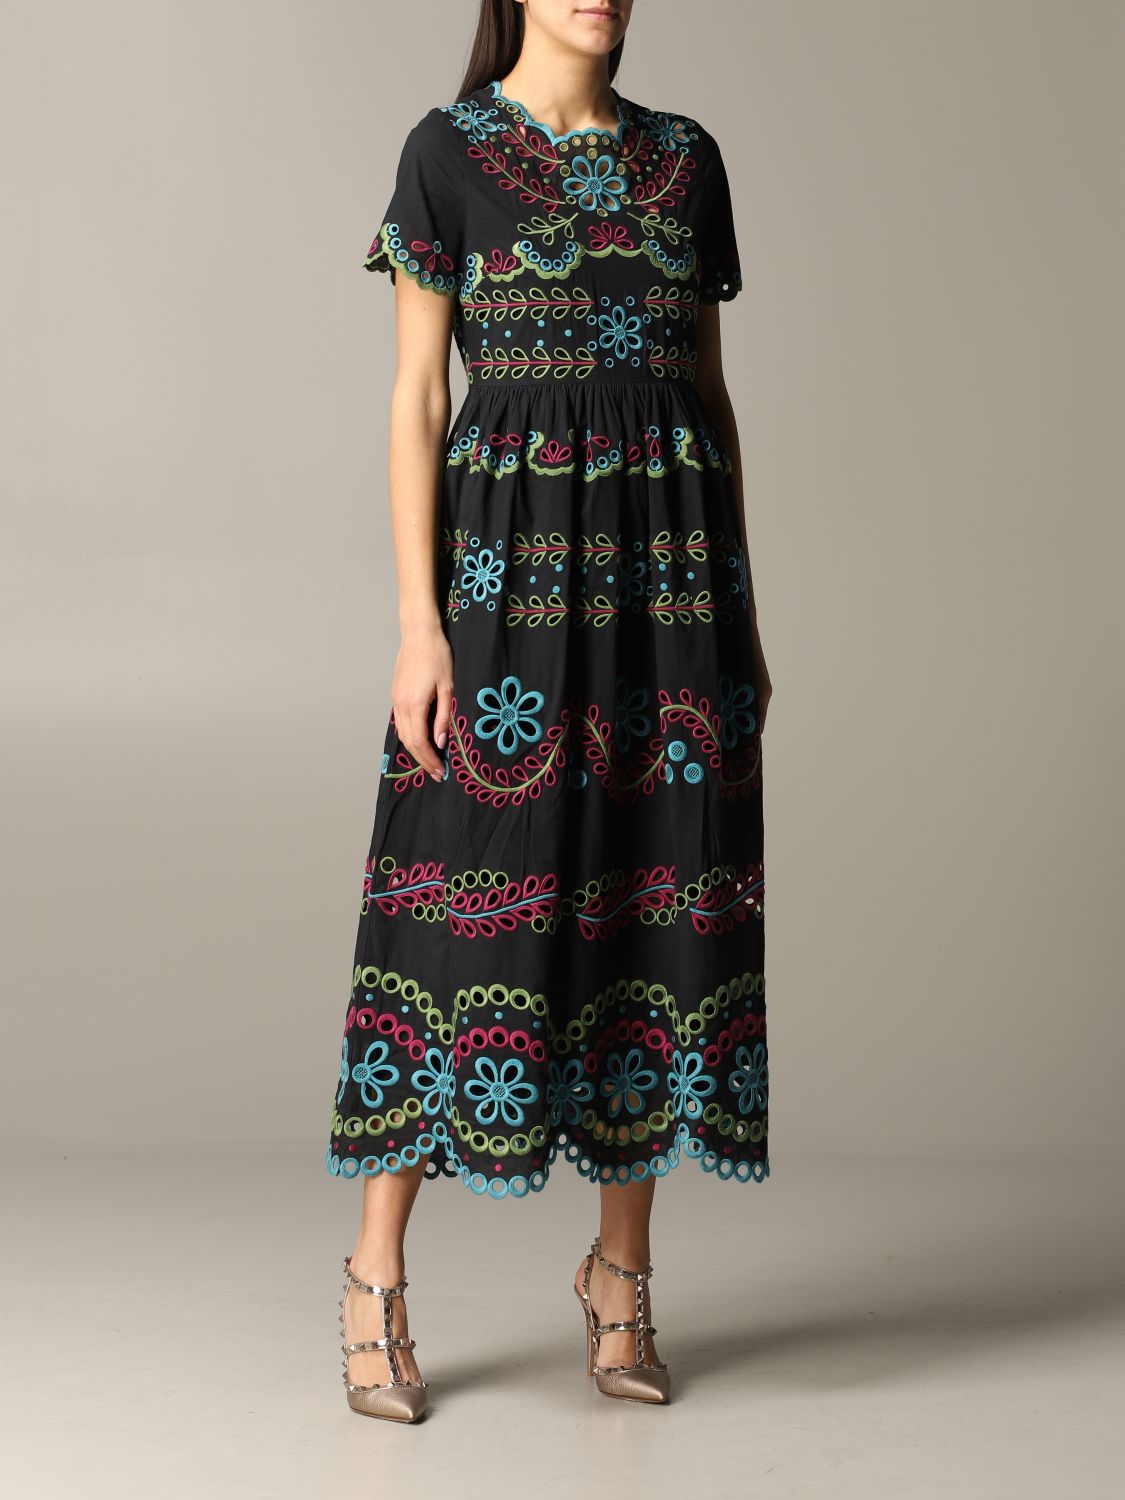 filter superstition fact RED VALENTINO: dress with floral embroidery print - Black | Red Valentino  dress TR0VA12B 51E online at GIGLIO.COM